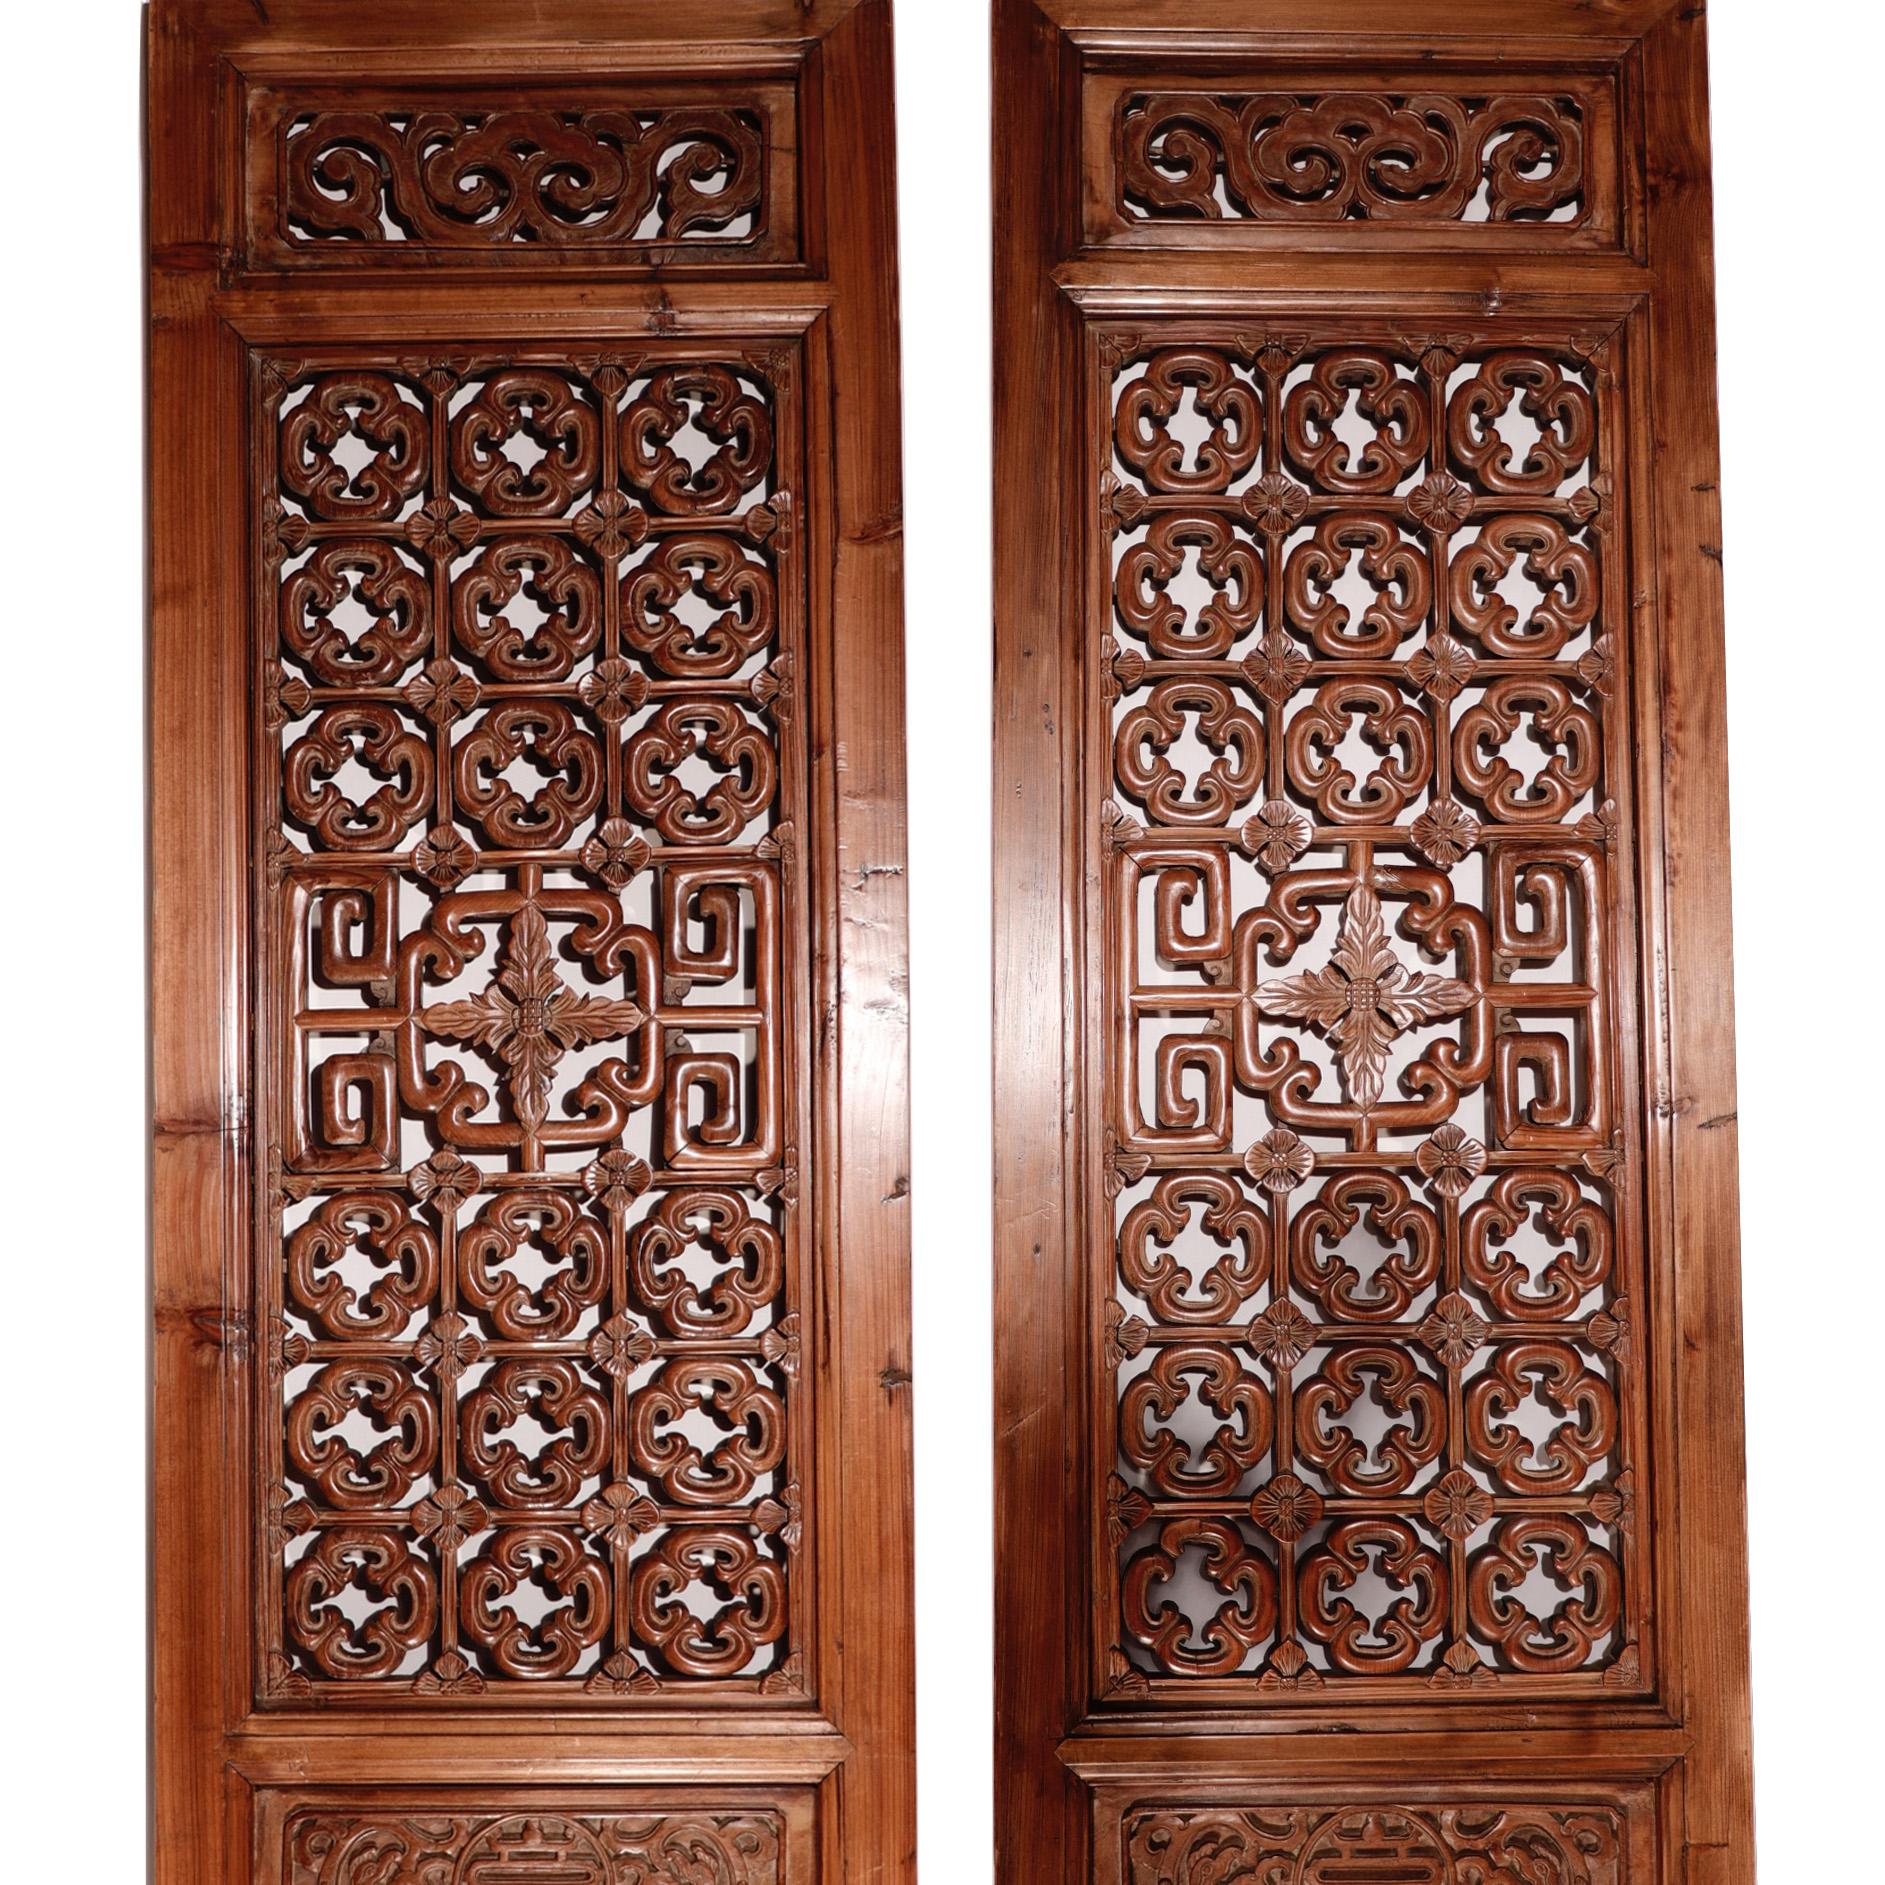 A pair of Chinese door panels, handcrafted of elm and cypress woods using traditional mortise and tenon joinery, having relief carving and an intricate openwork quatrefoil lattice pattern and corner blossoms on each upper section, central small